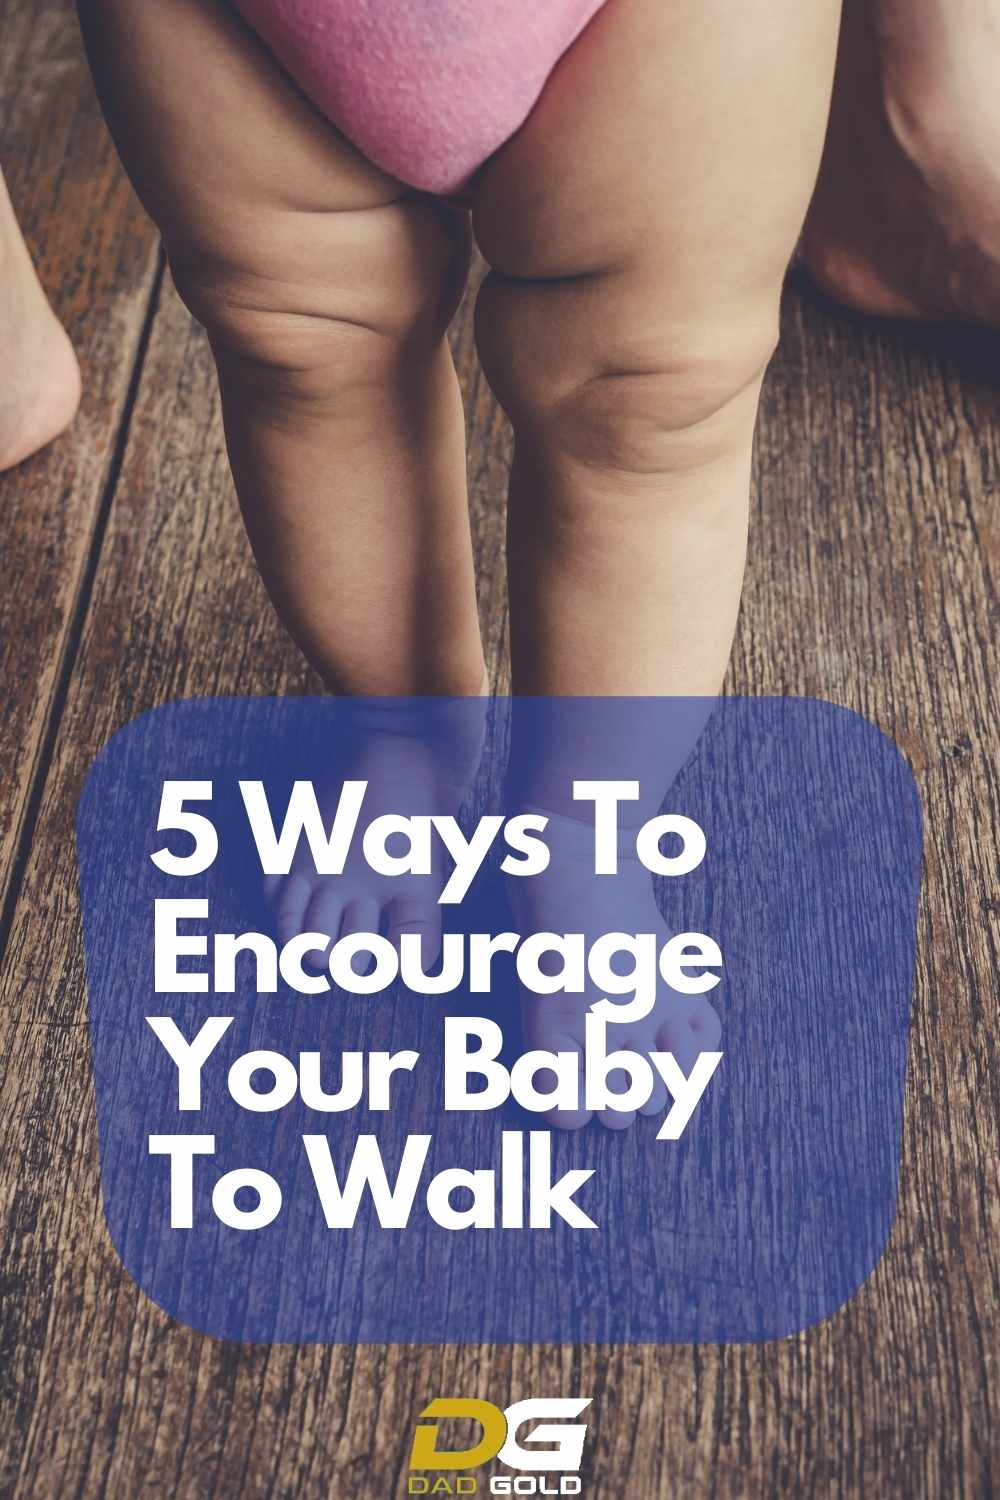 5 Ways To Encourage Your Baby To Walk